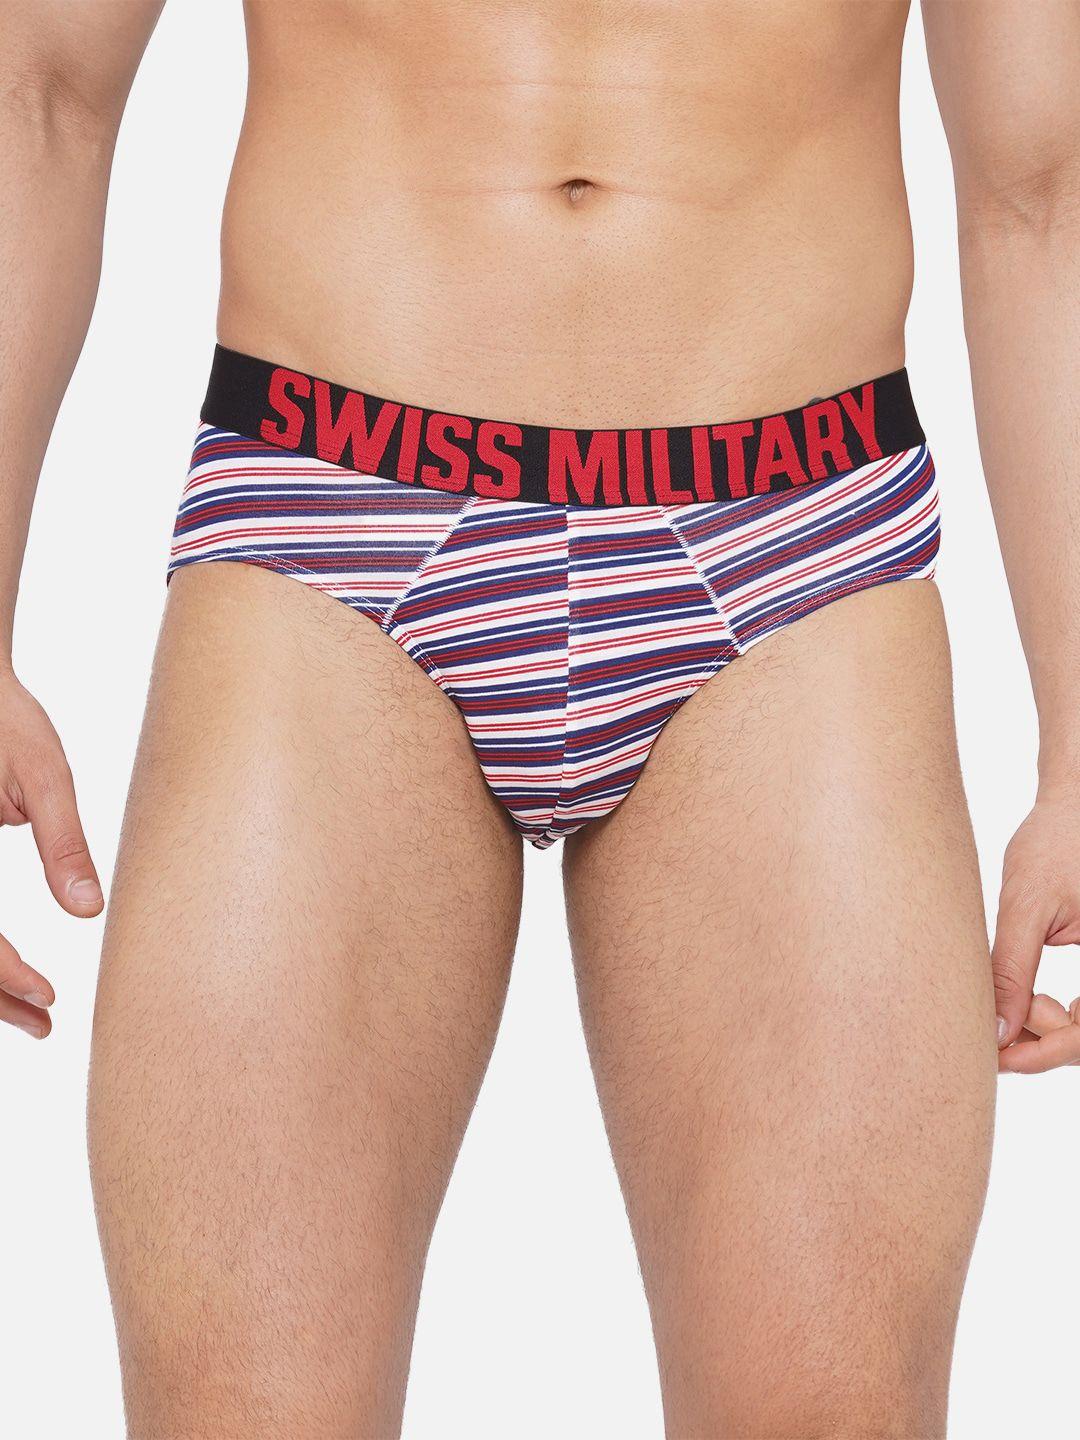 swiss military men striped mid-rise anti microbial basic brief